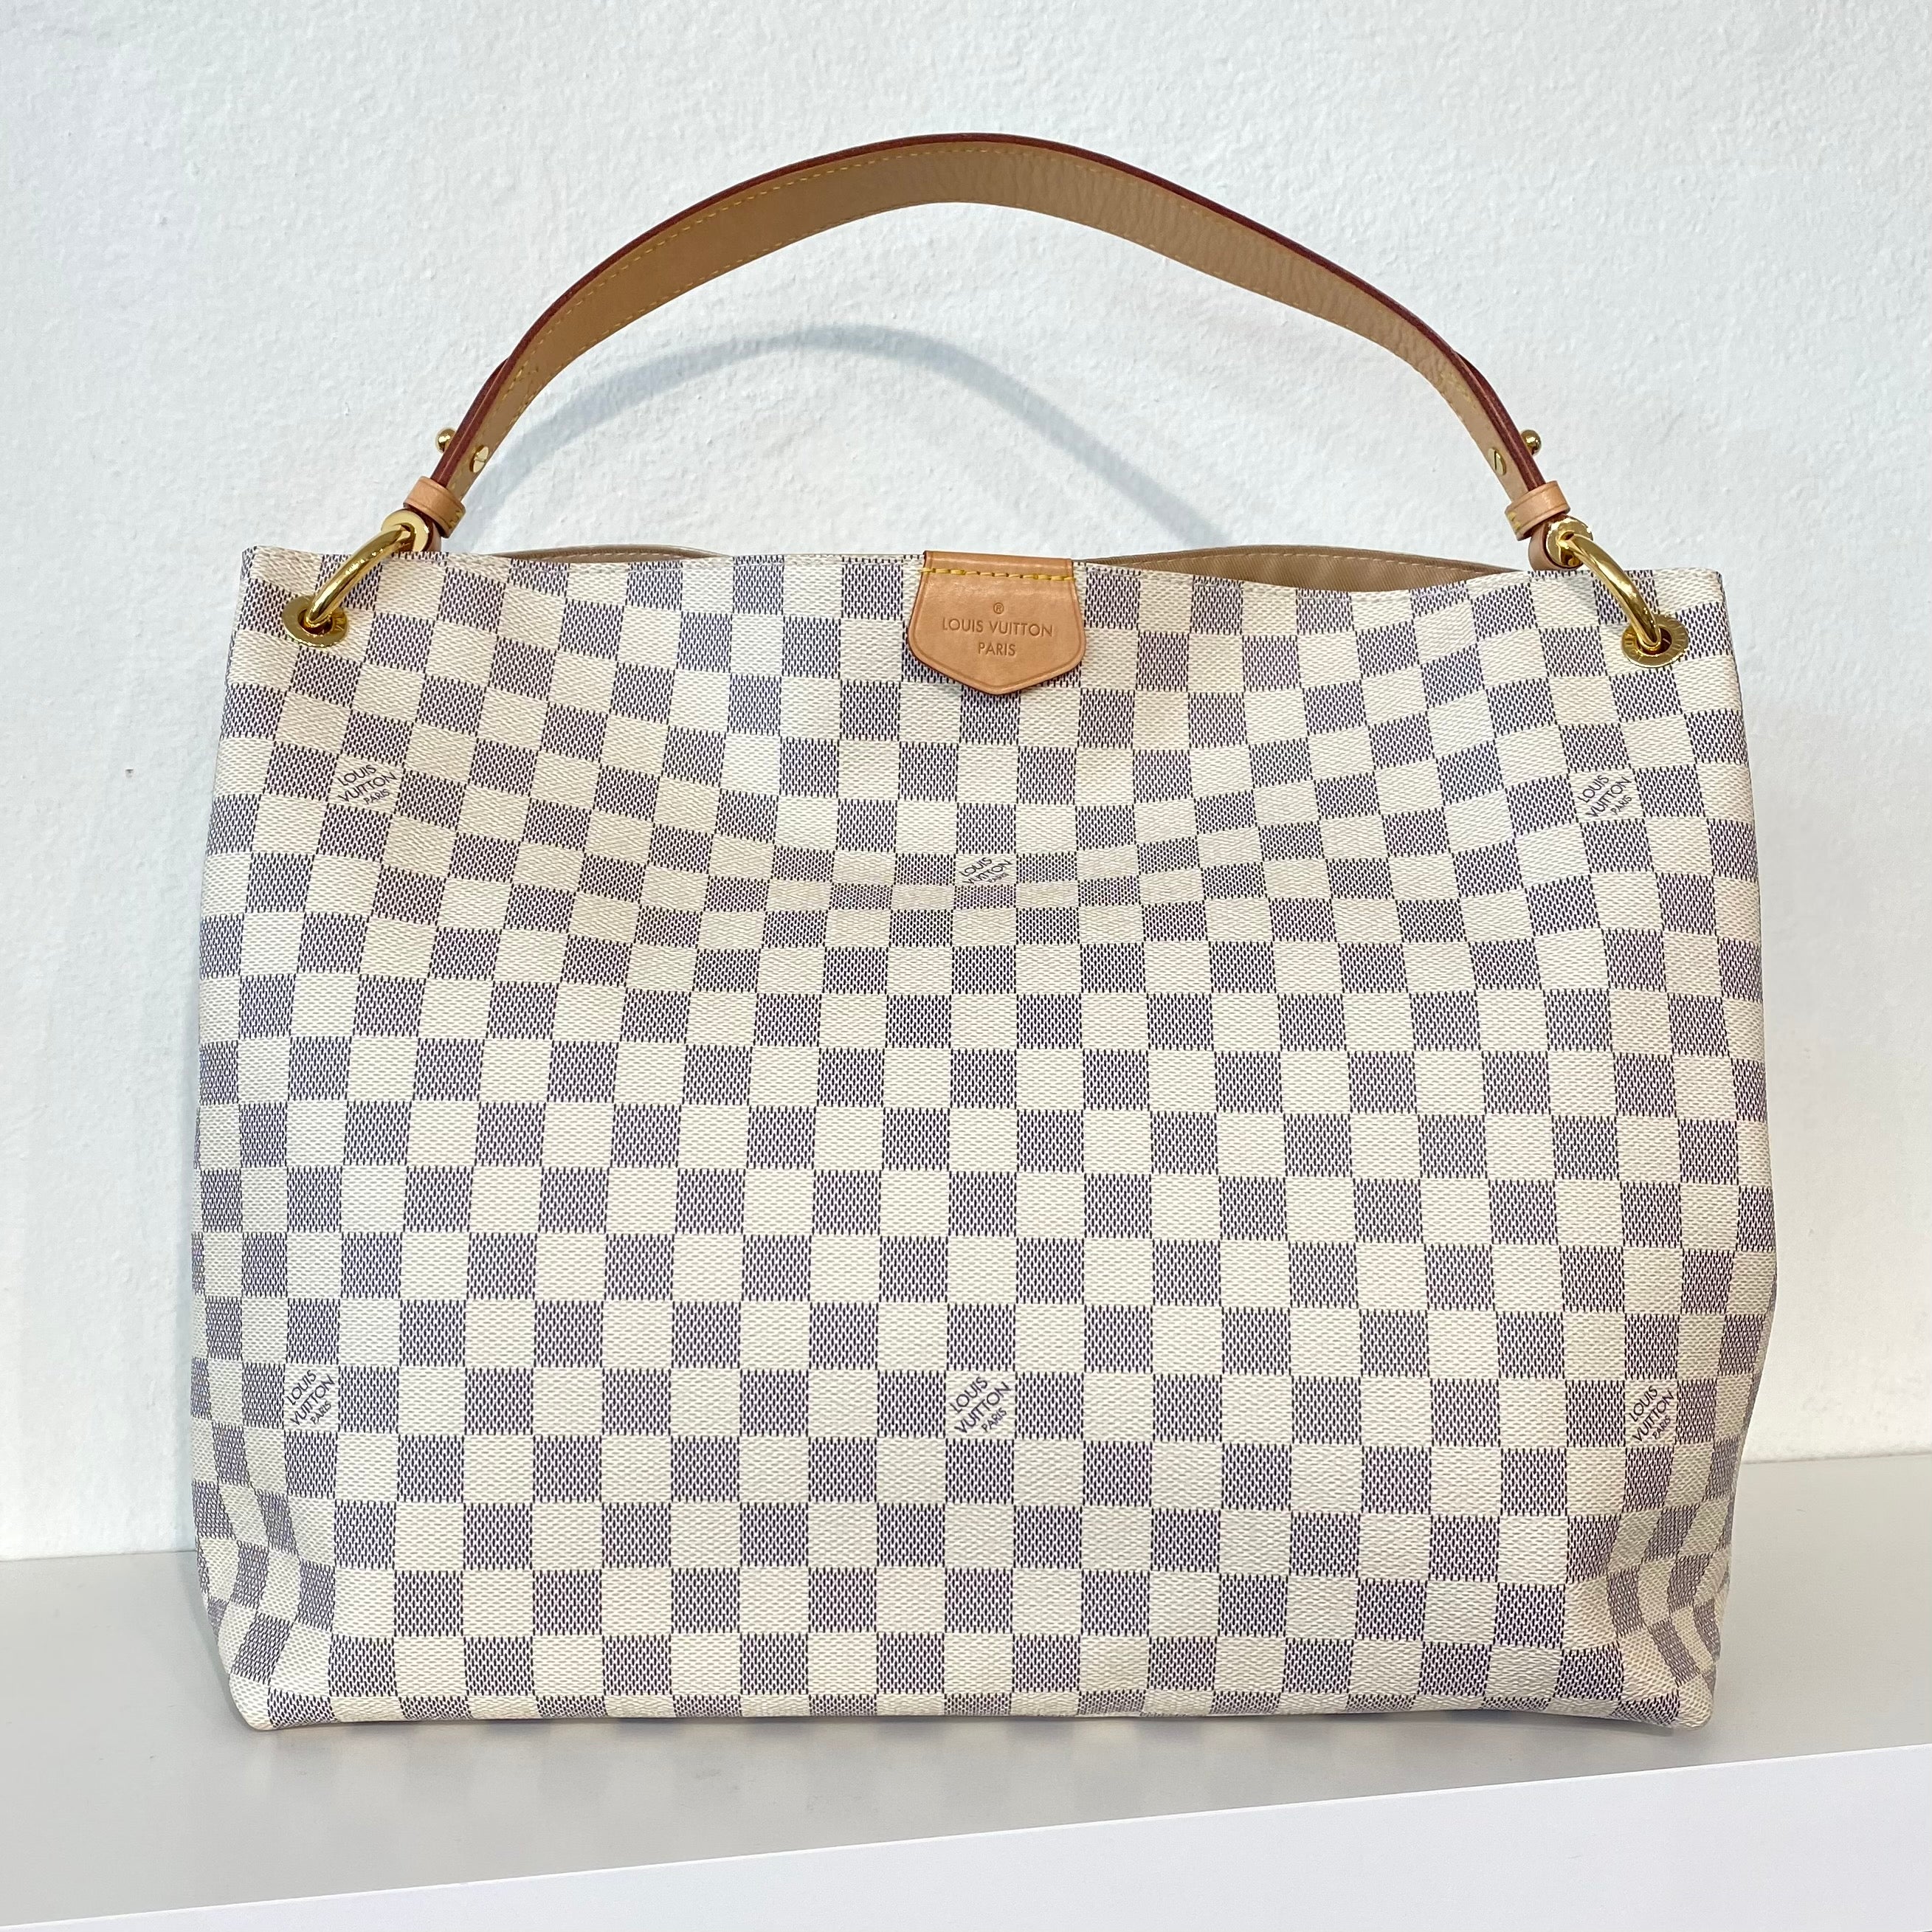 Products by Louis Vuitton: Graceful PM  Louis vuitton handtaschen,  Handtasche beige, Louis vuitton